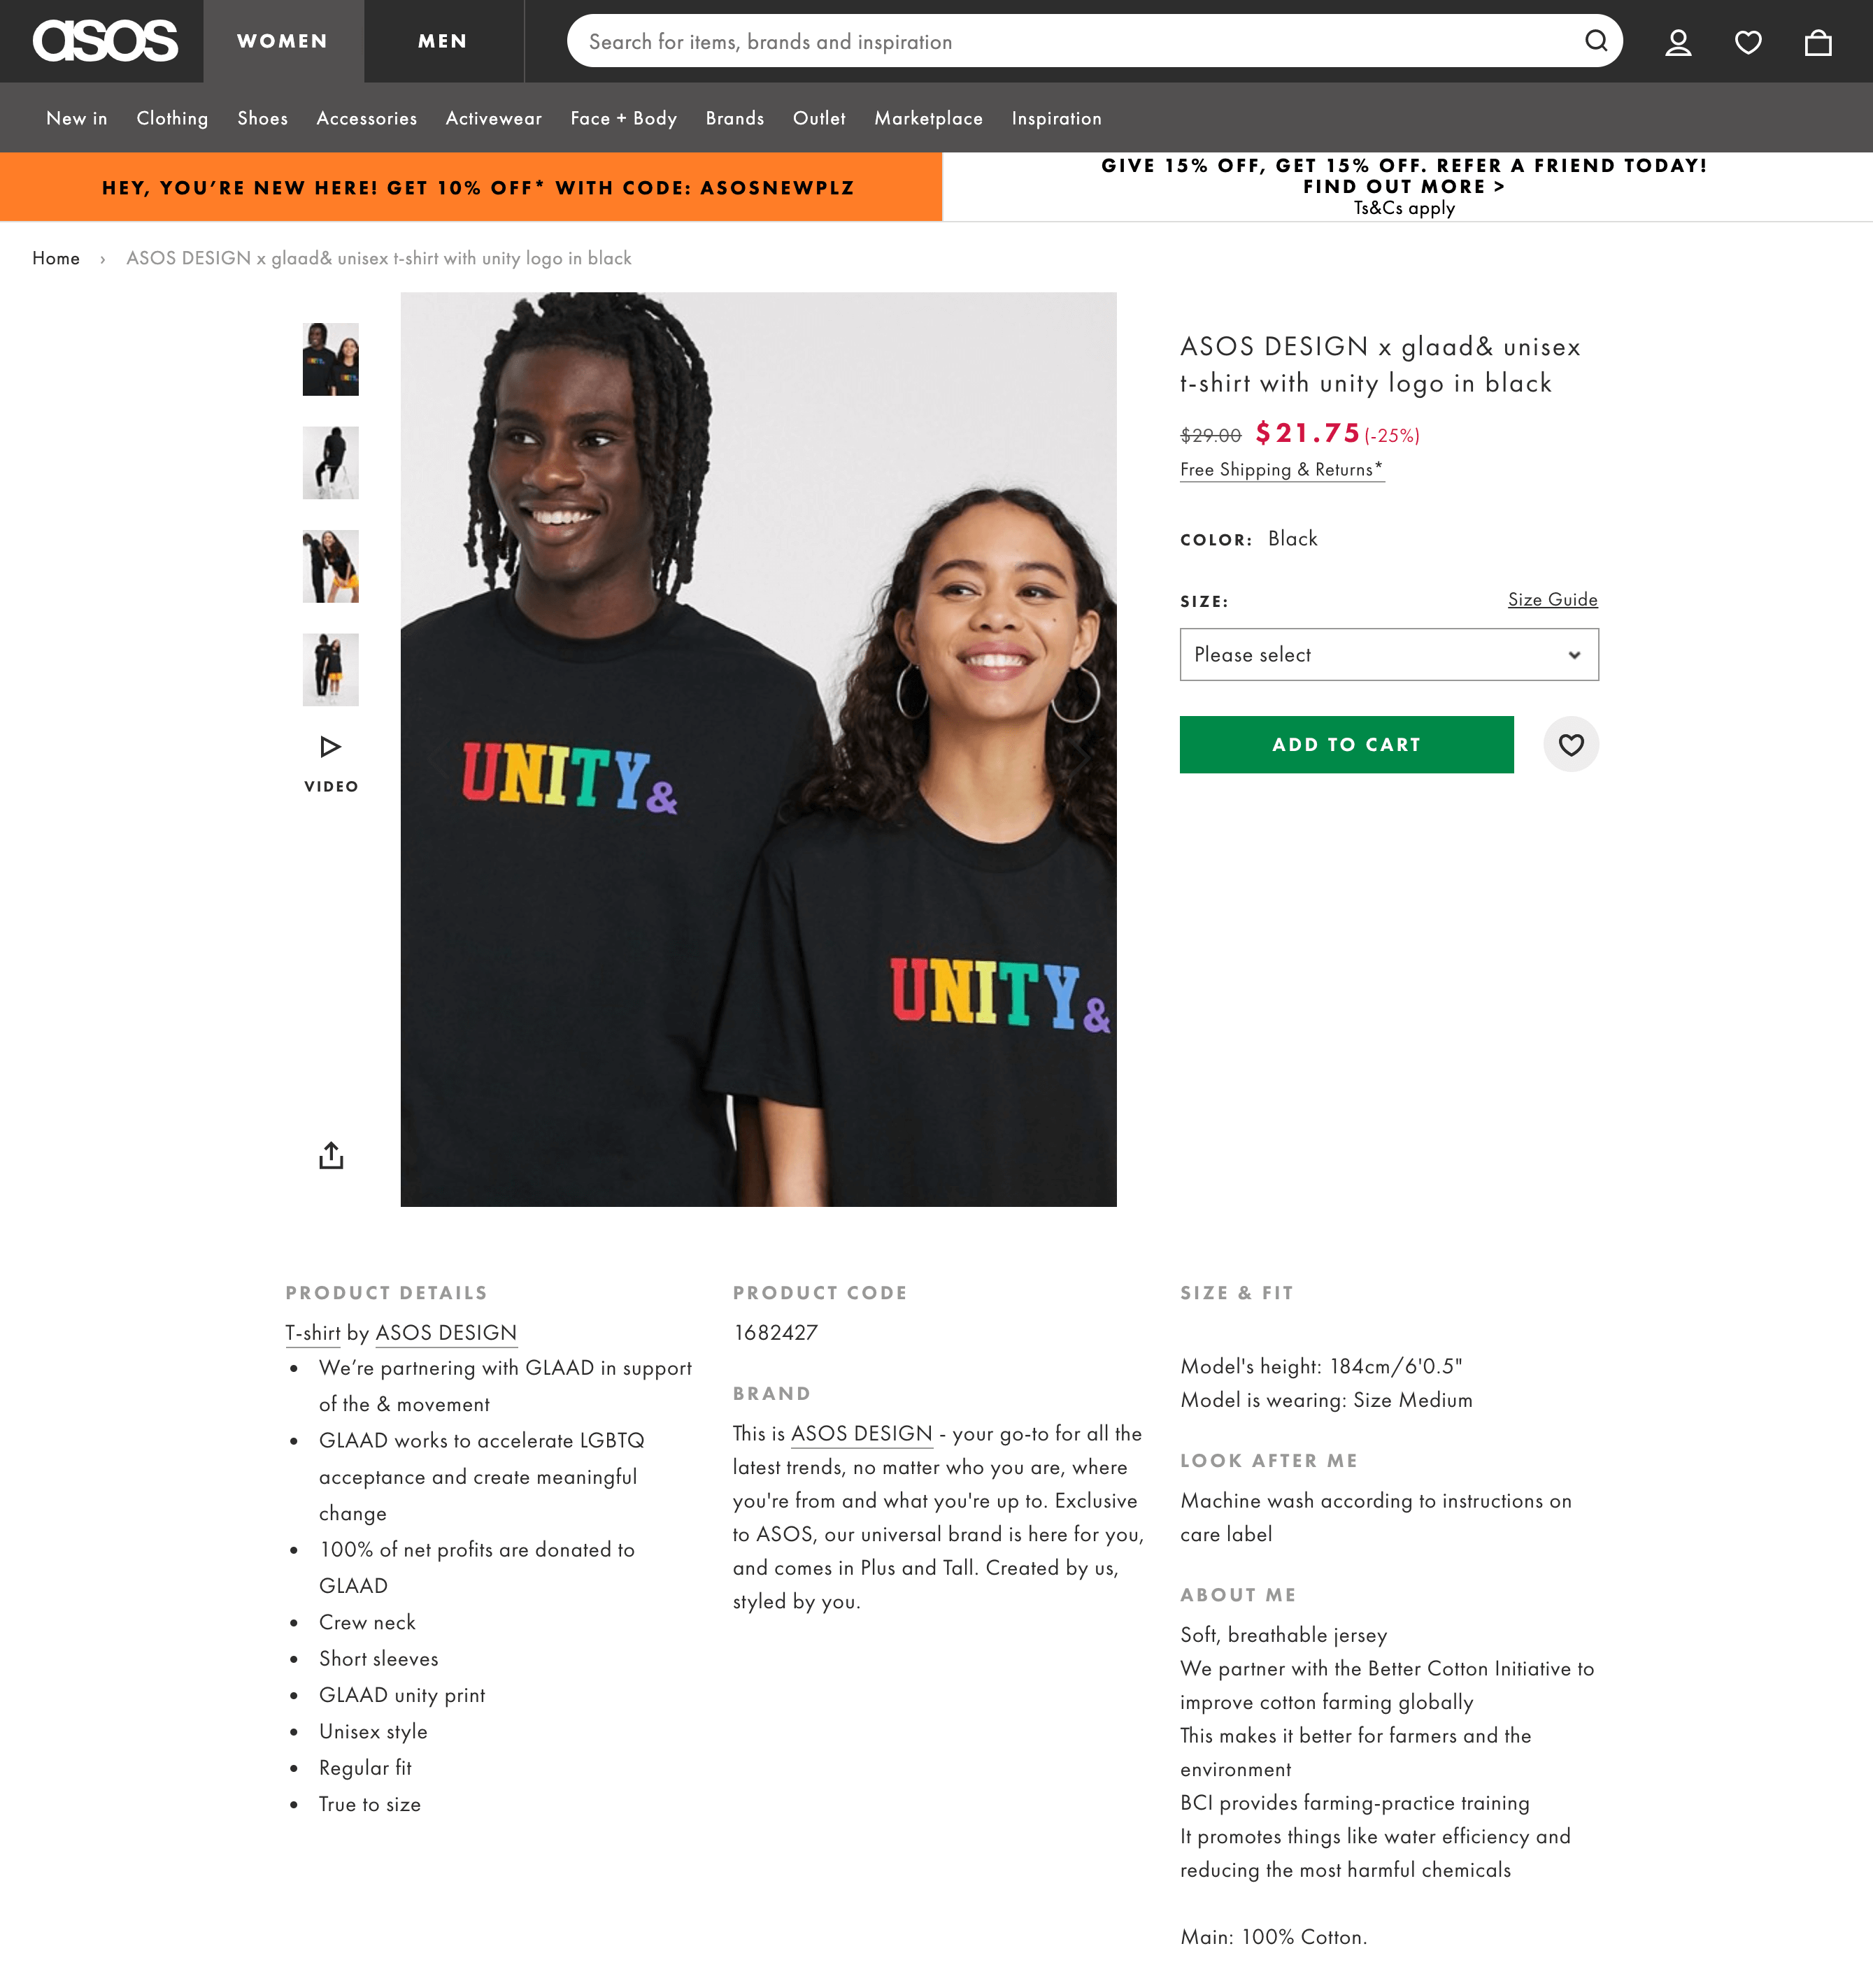 A gender neutral product on ASOS.com that only has one model's dimensions listed